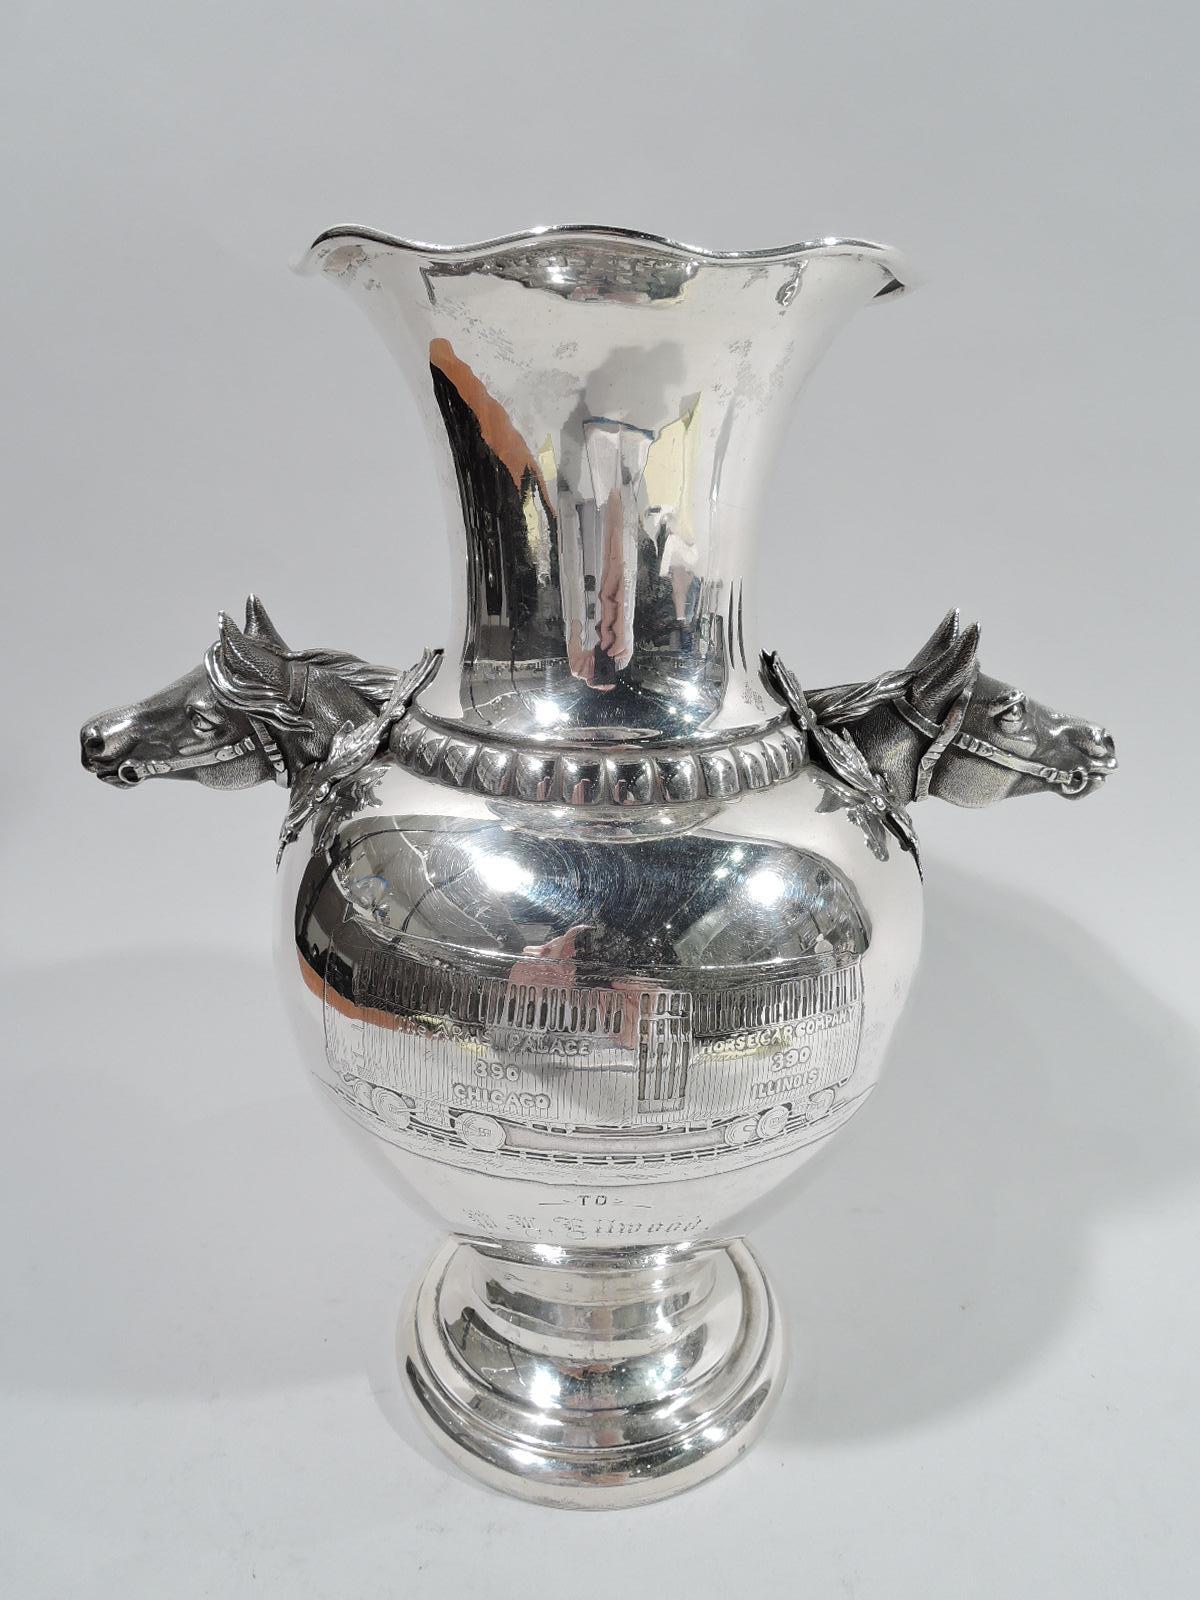 Turn-of-the-century sterling silver trophy cup. Made by Peter L. Krider in Philadelphia. Baluster body on raised foot. Straight neck with ruffled rim. Gadrooned border. Mounted to shoulder are two cast horse heads wreathed in laurel. Acid-etched and